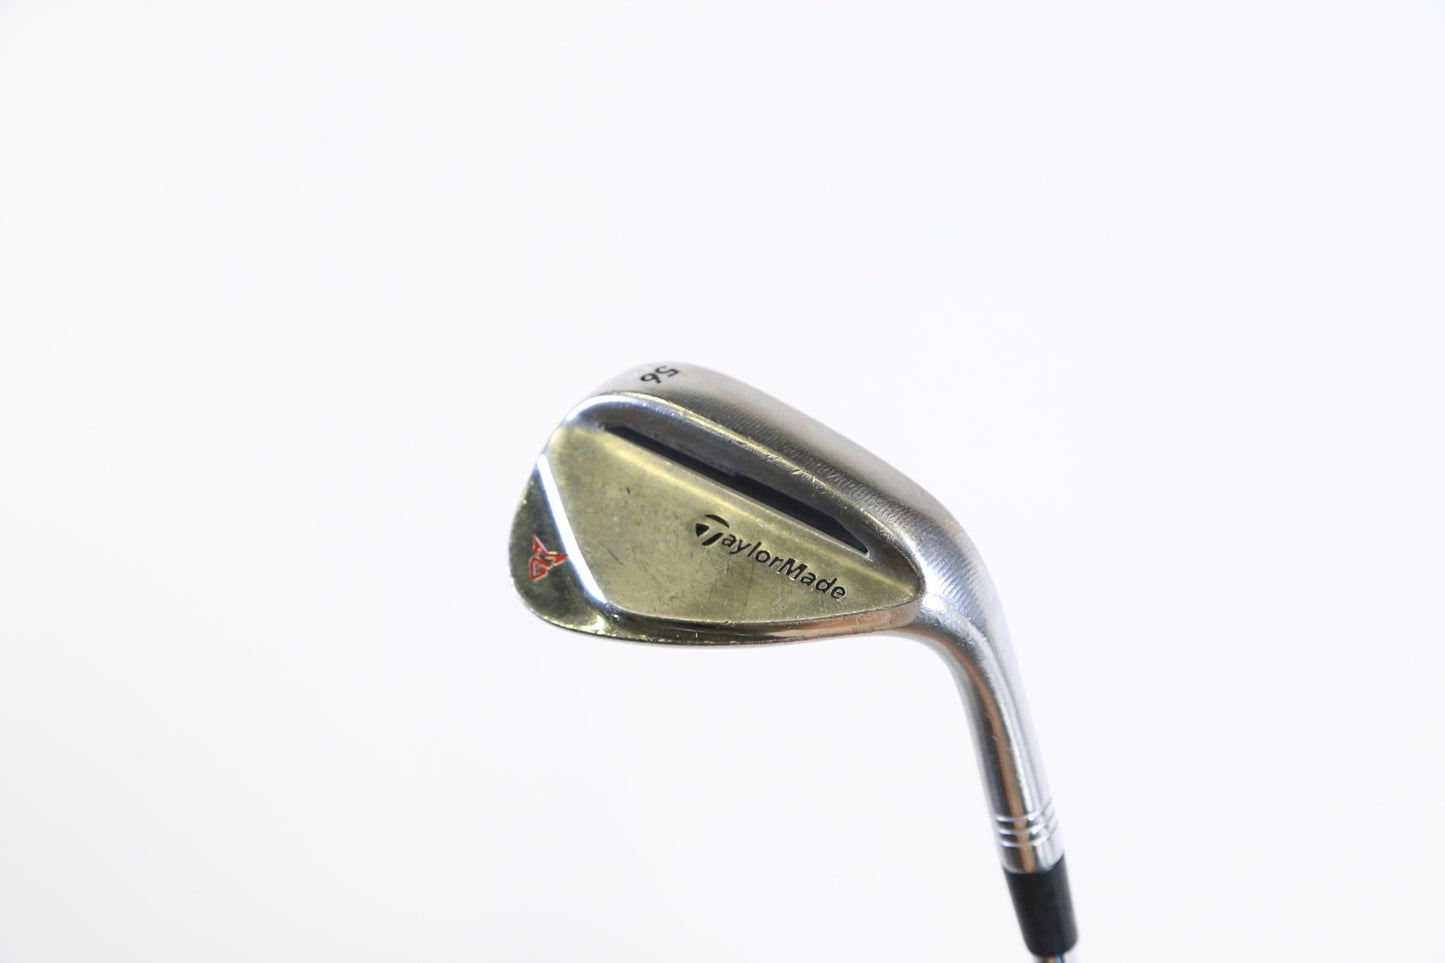 Used TaylorMade MG2 Chrome SB Sand Wedge - Right-Handed - 56 Degrees - Stiff Flex